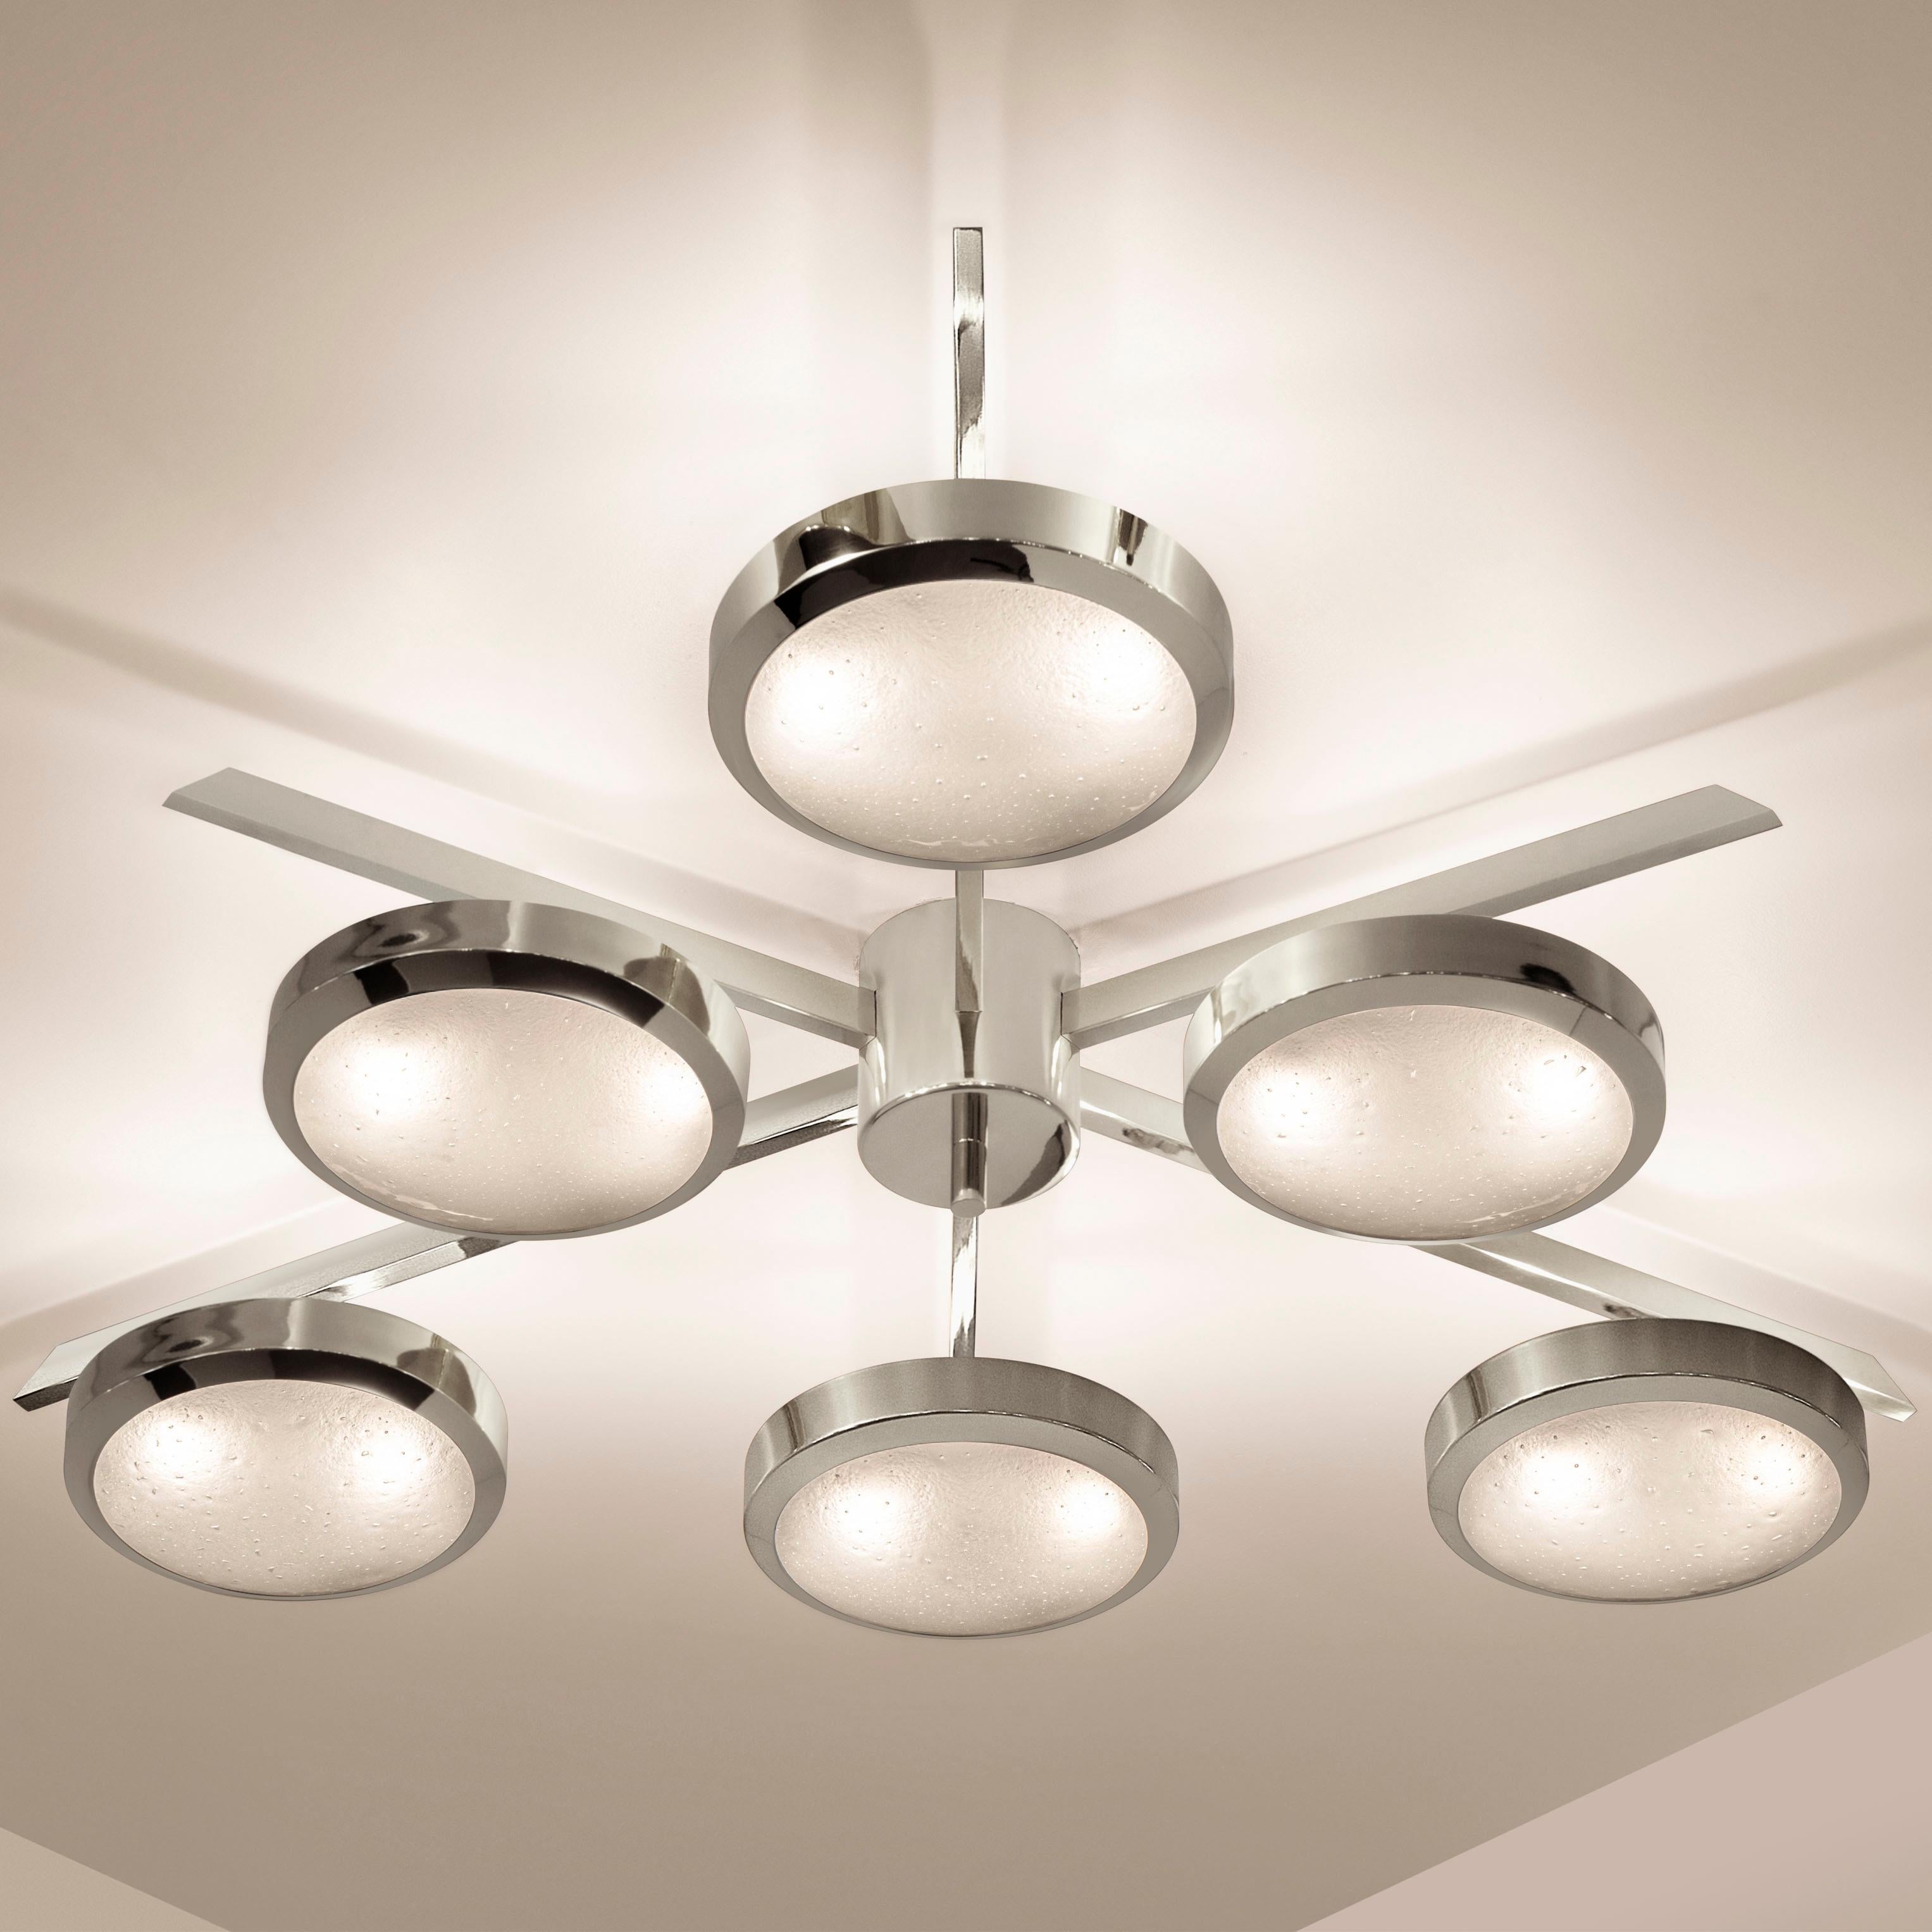 The Sei ceiling light is characterized by its star shaped frame with six suspended Murano glass shades. The first images show the fixture in our polished nickel finish-subsequent pictures show it in a selection of alternative finishes. Starts at